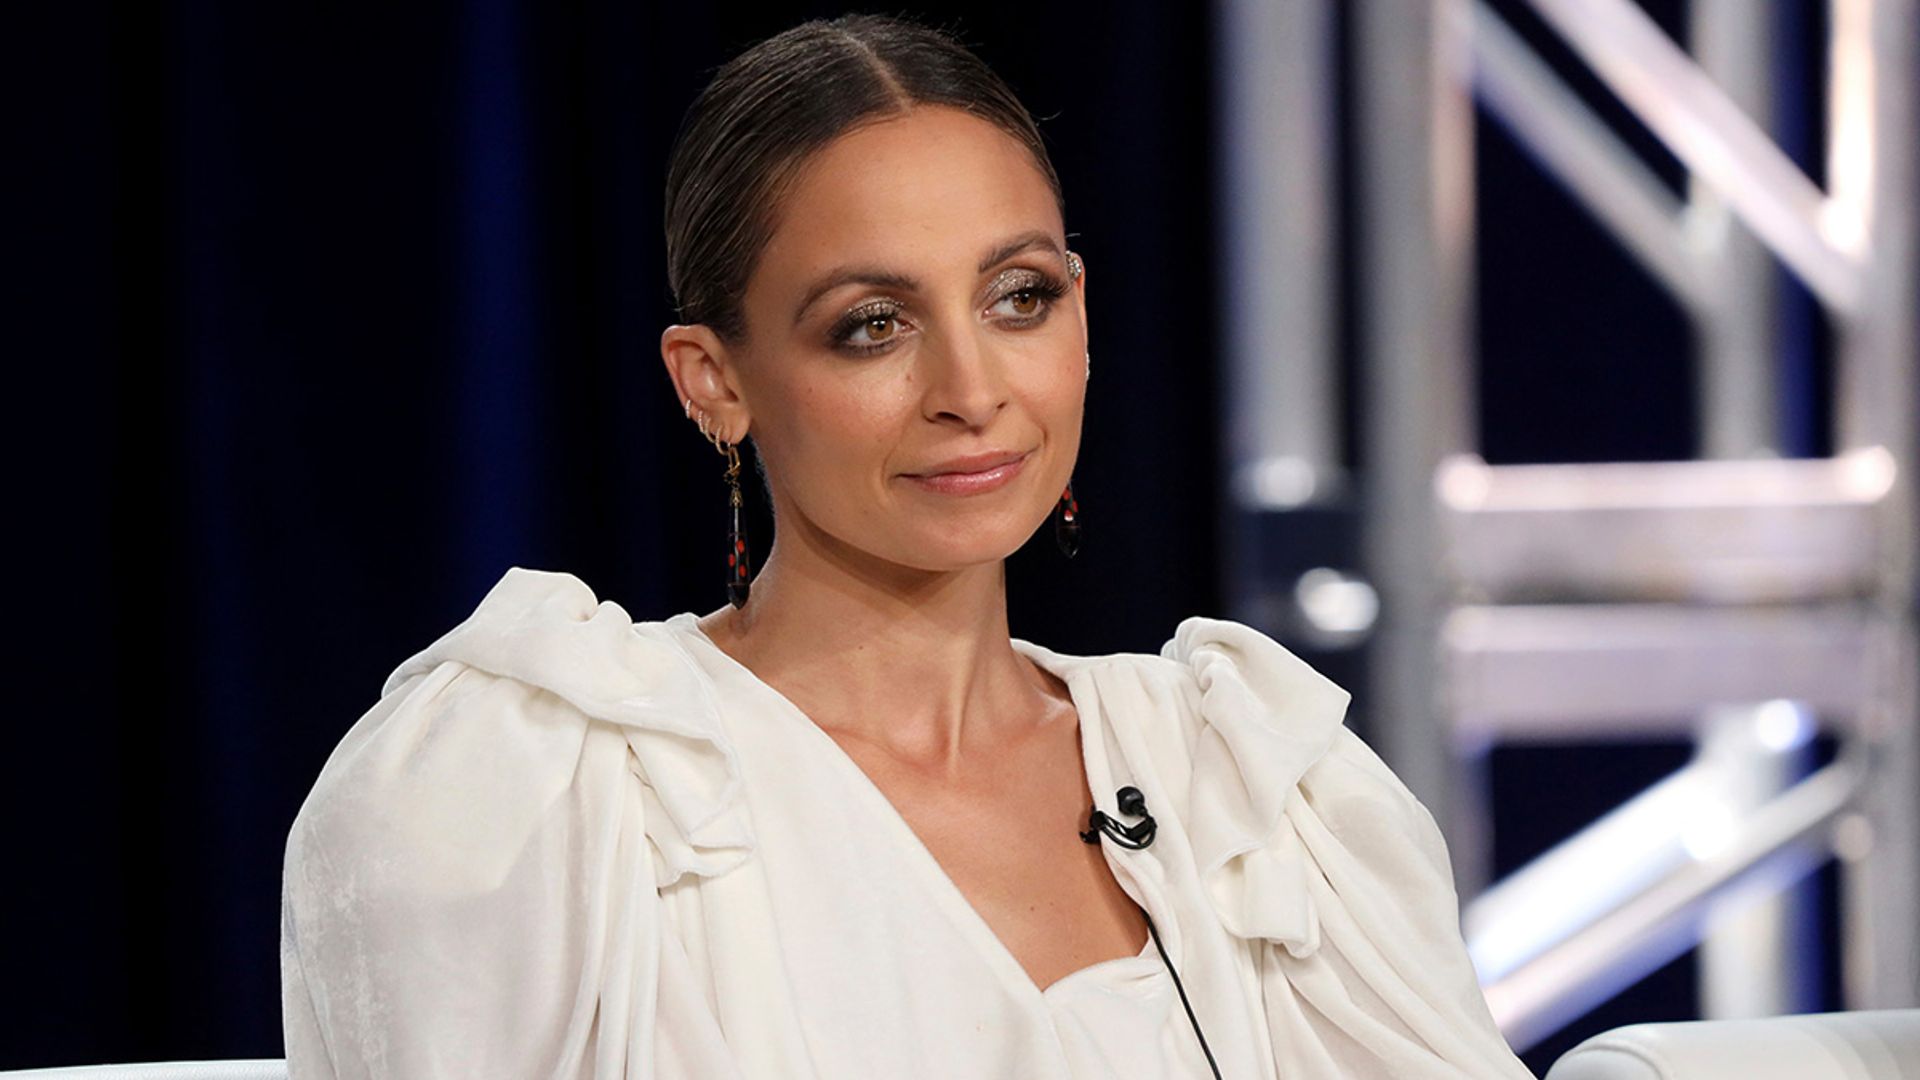 Nicole Richie accidentally sets her hair on fire in shocking birthday video